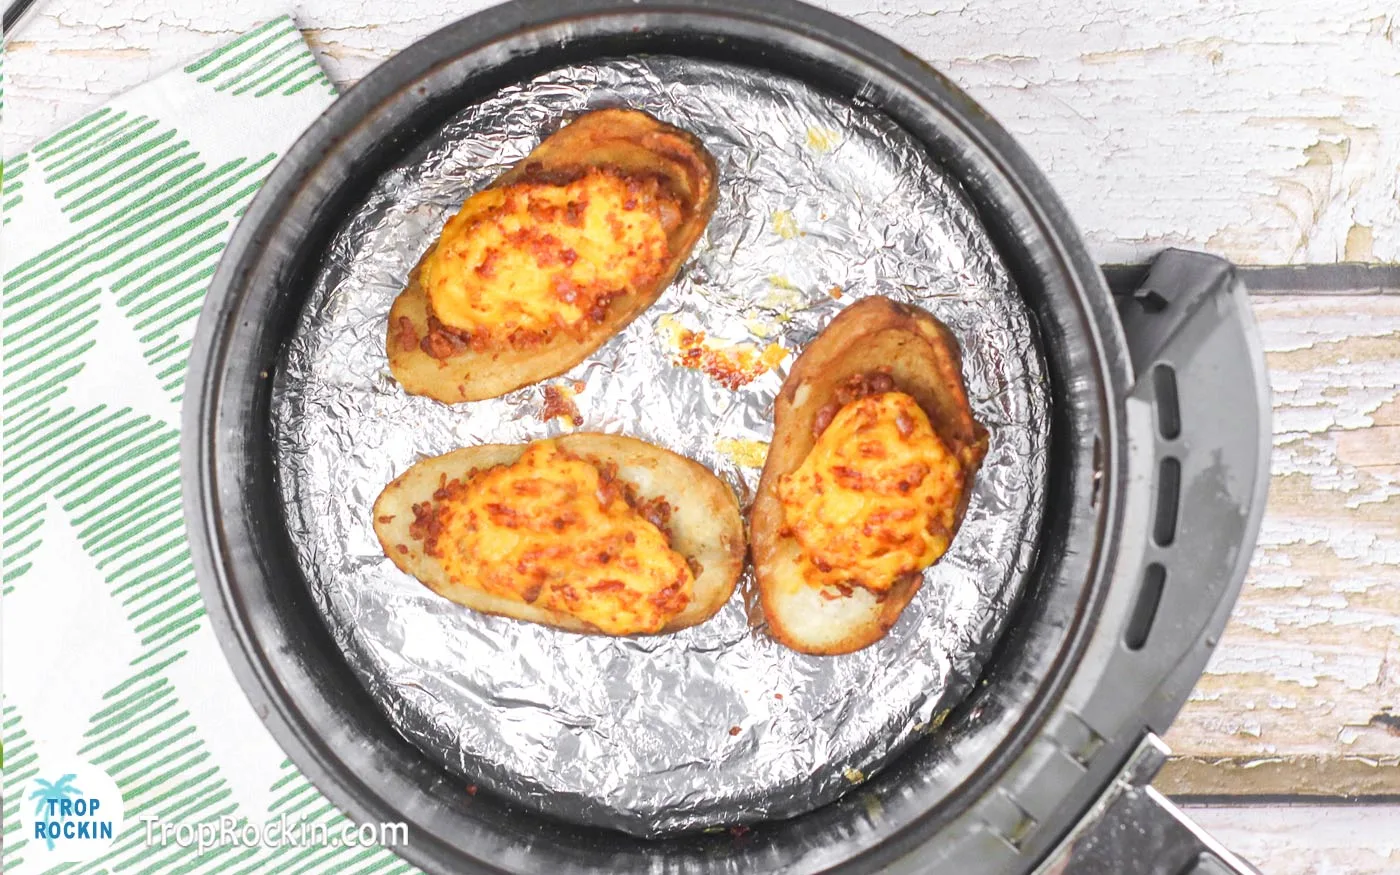 Frozen Potato skins in air fryer after cooked.